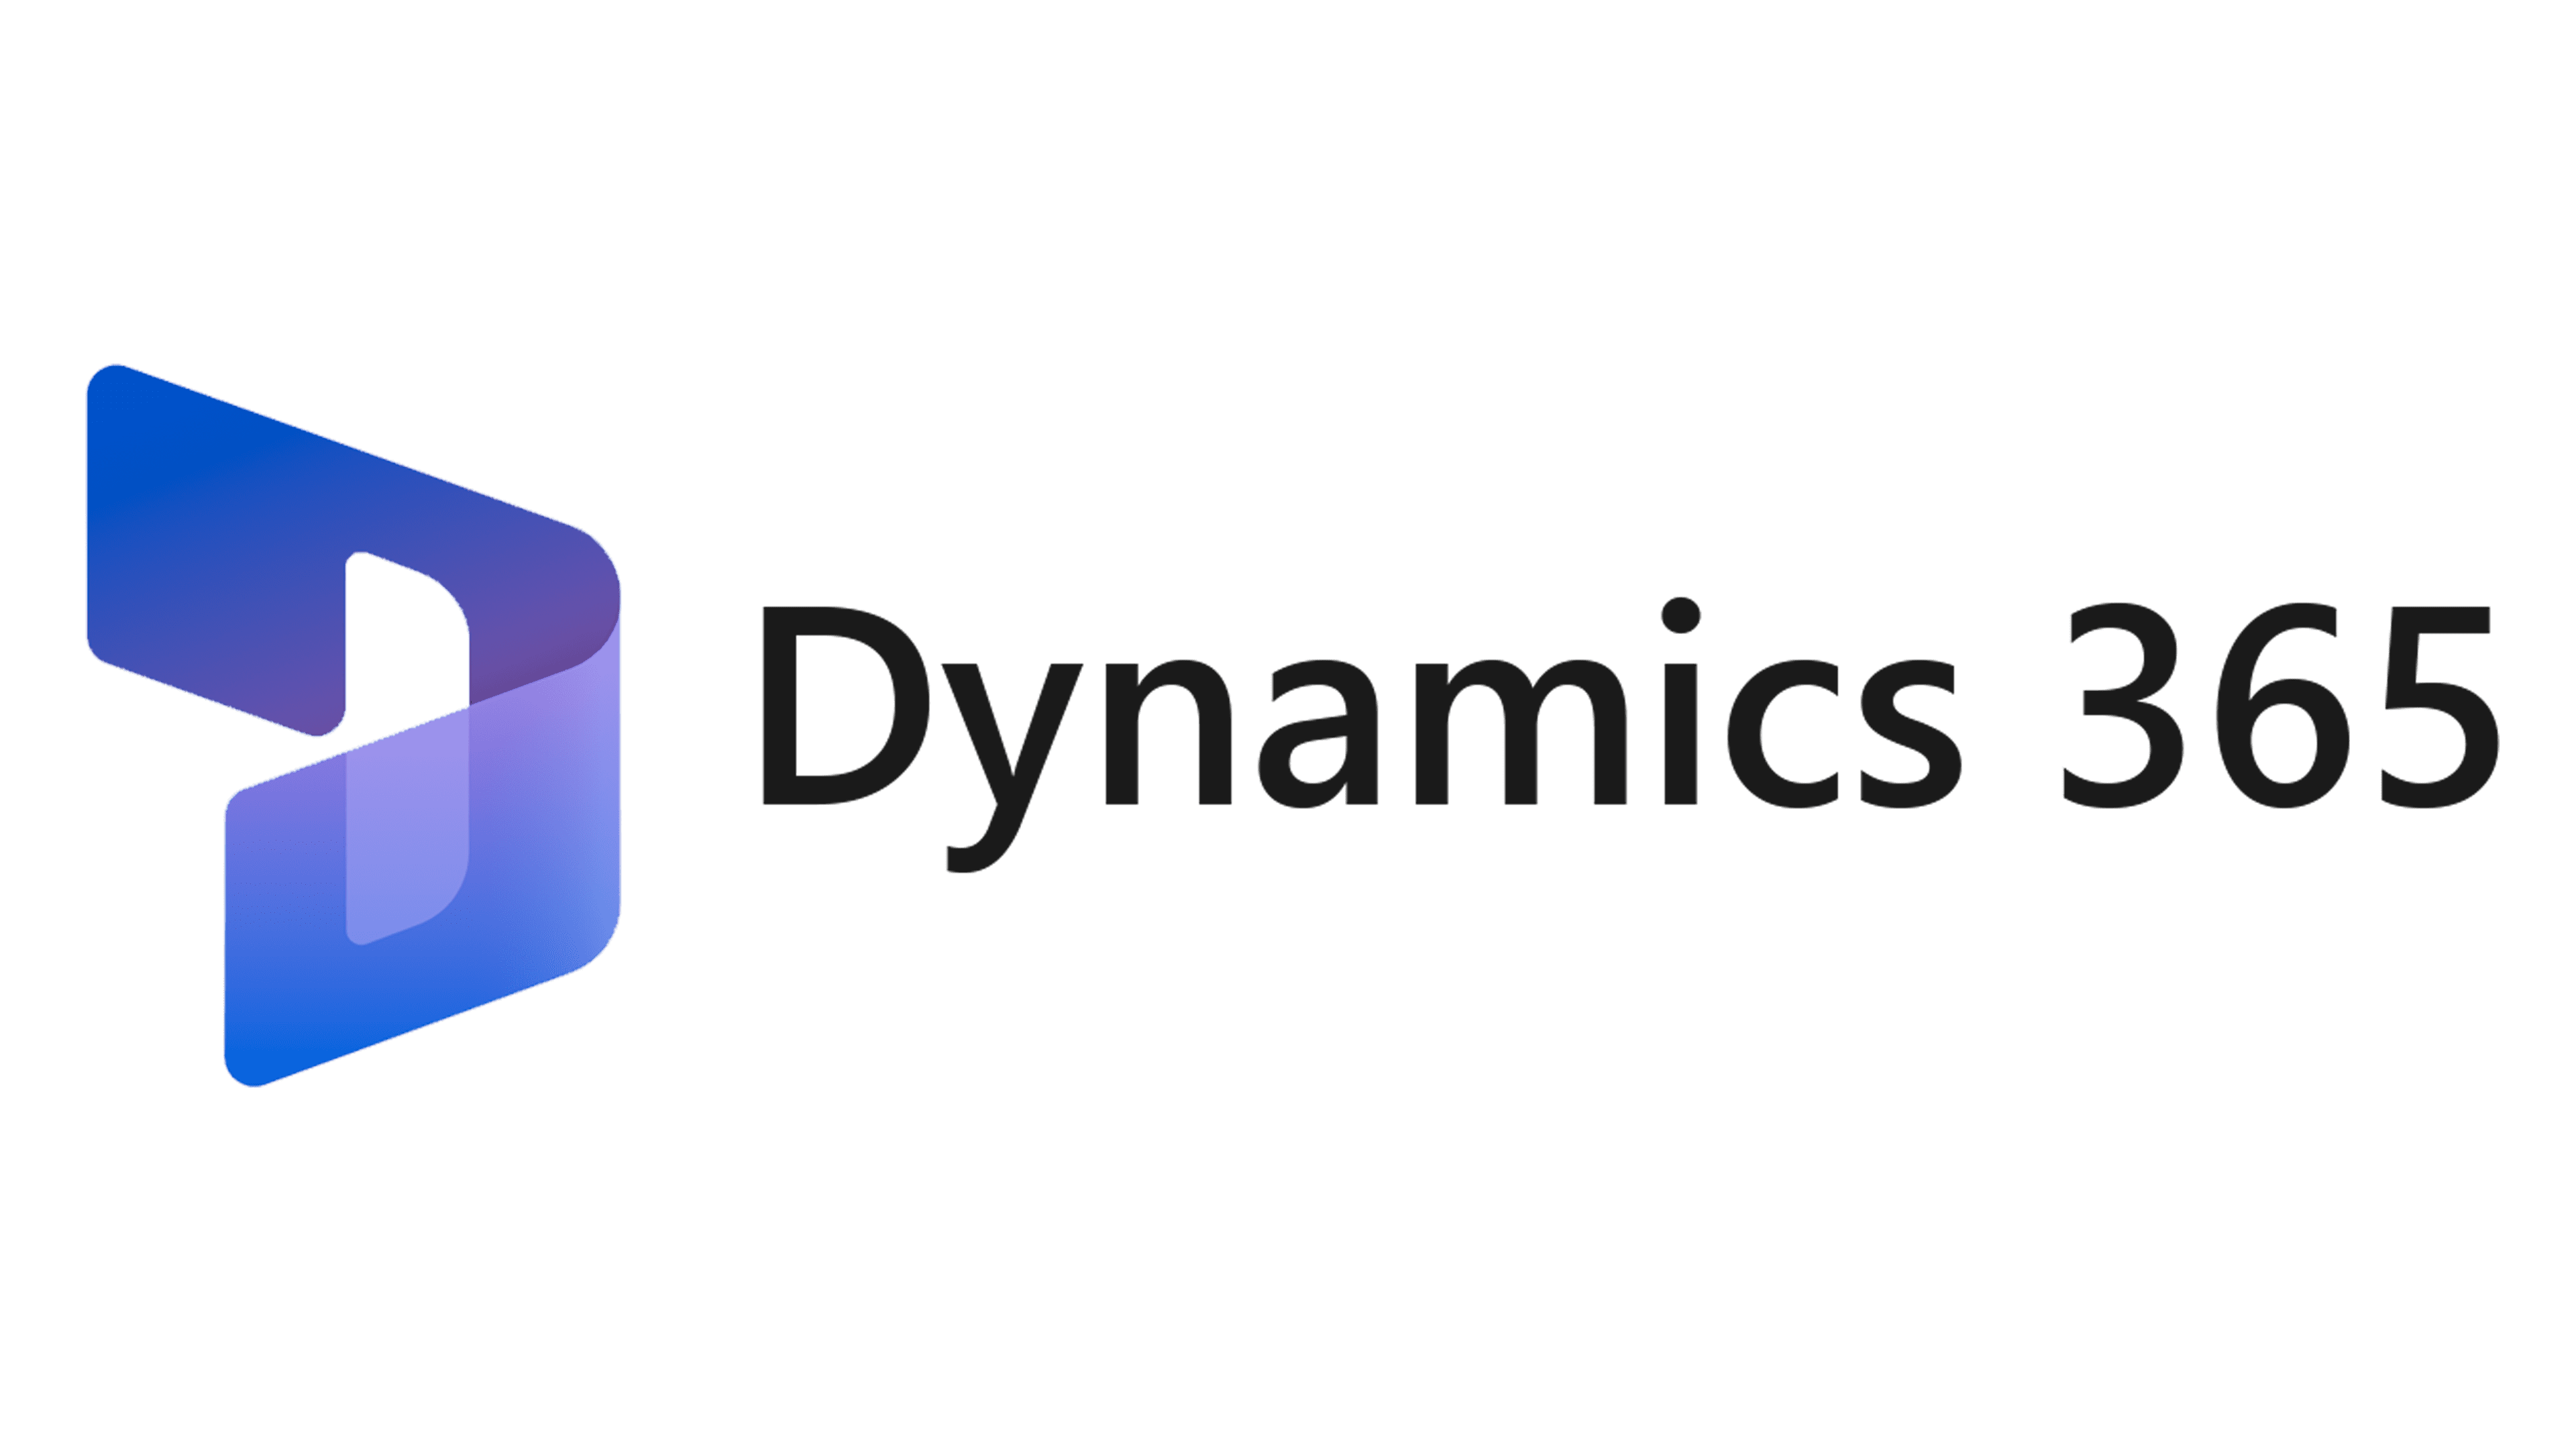 Microsoft Dynamics logo photo, technology, CRM, Data, Business Consulting, Growth, digital transformation, customer experience